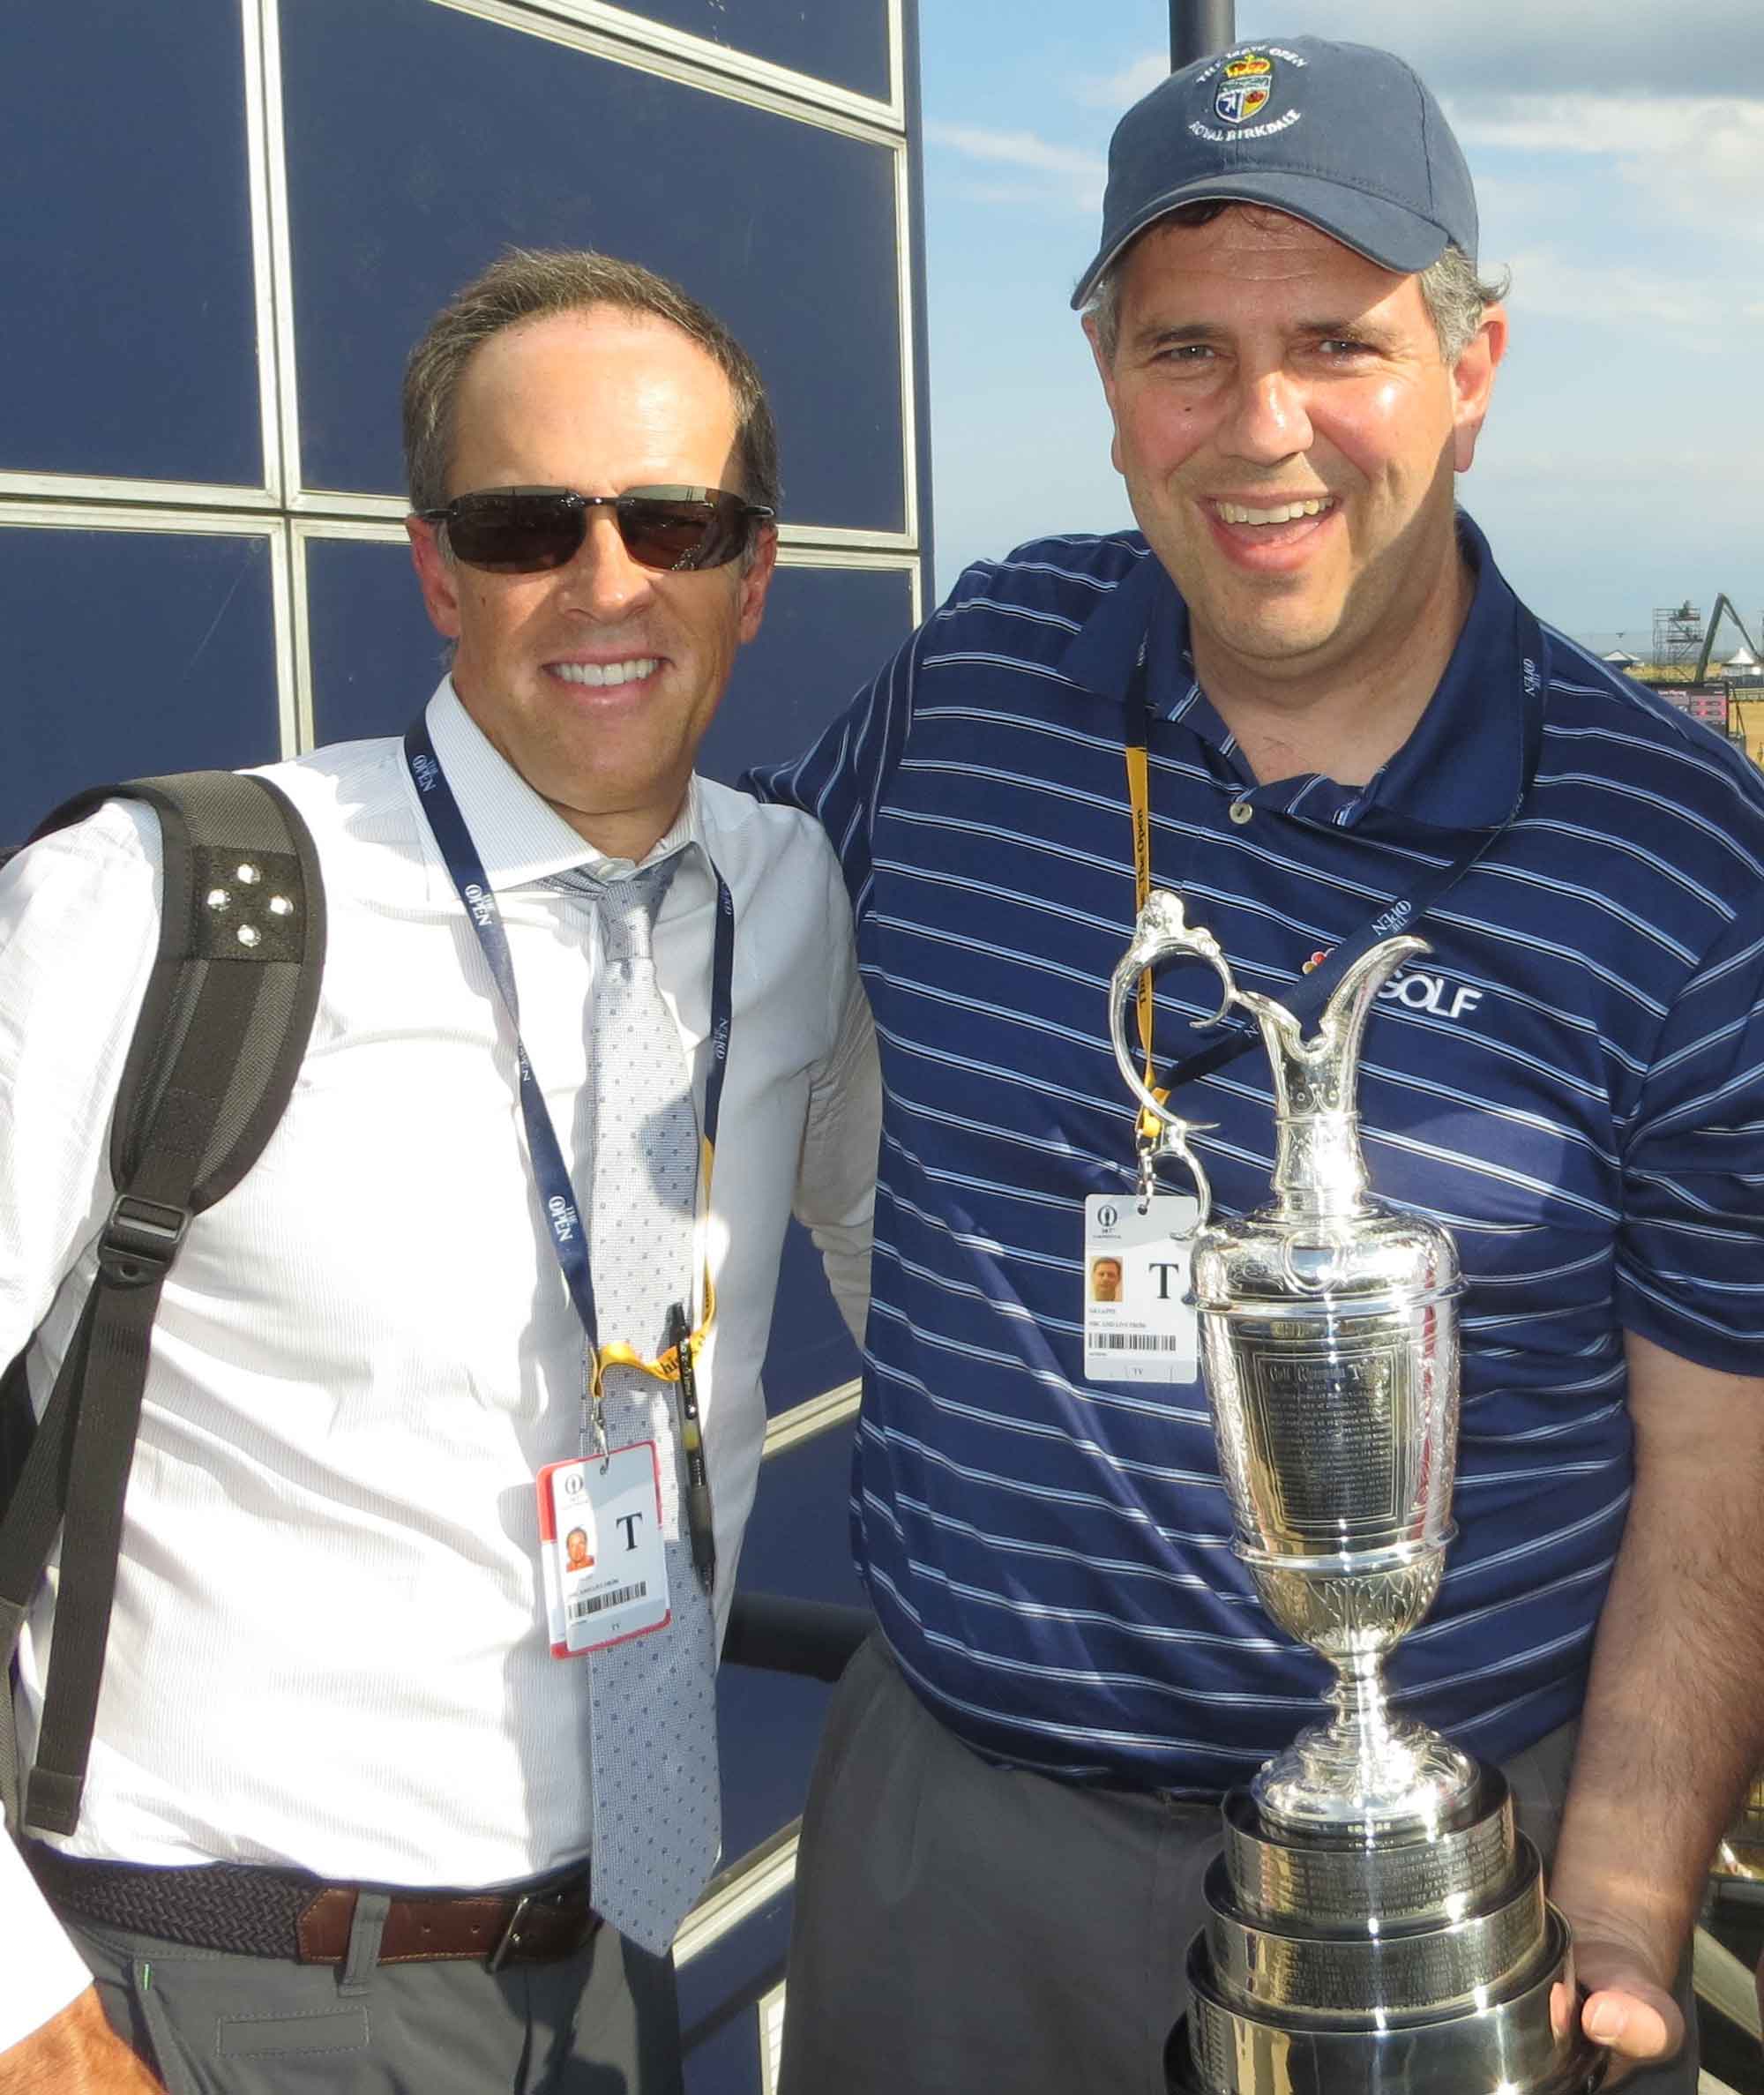 NBC Sports lead golf commentator Dan Hicks and Gil Capps with the Claret Jug